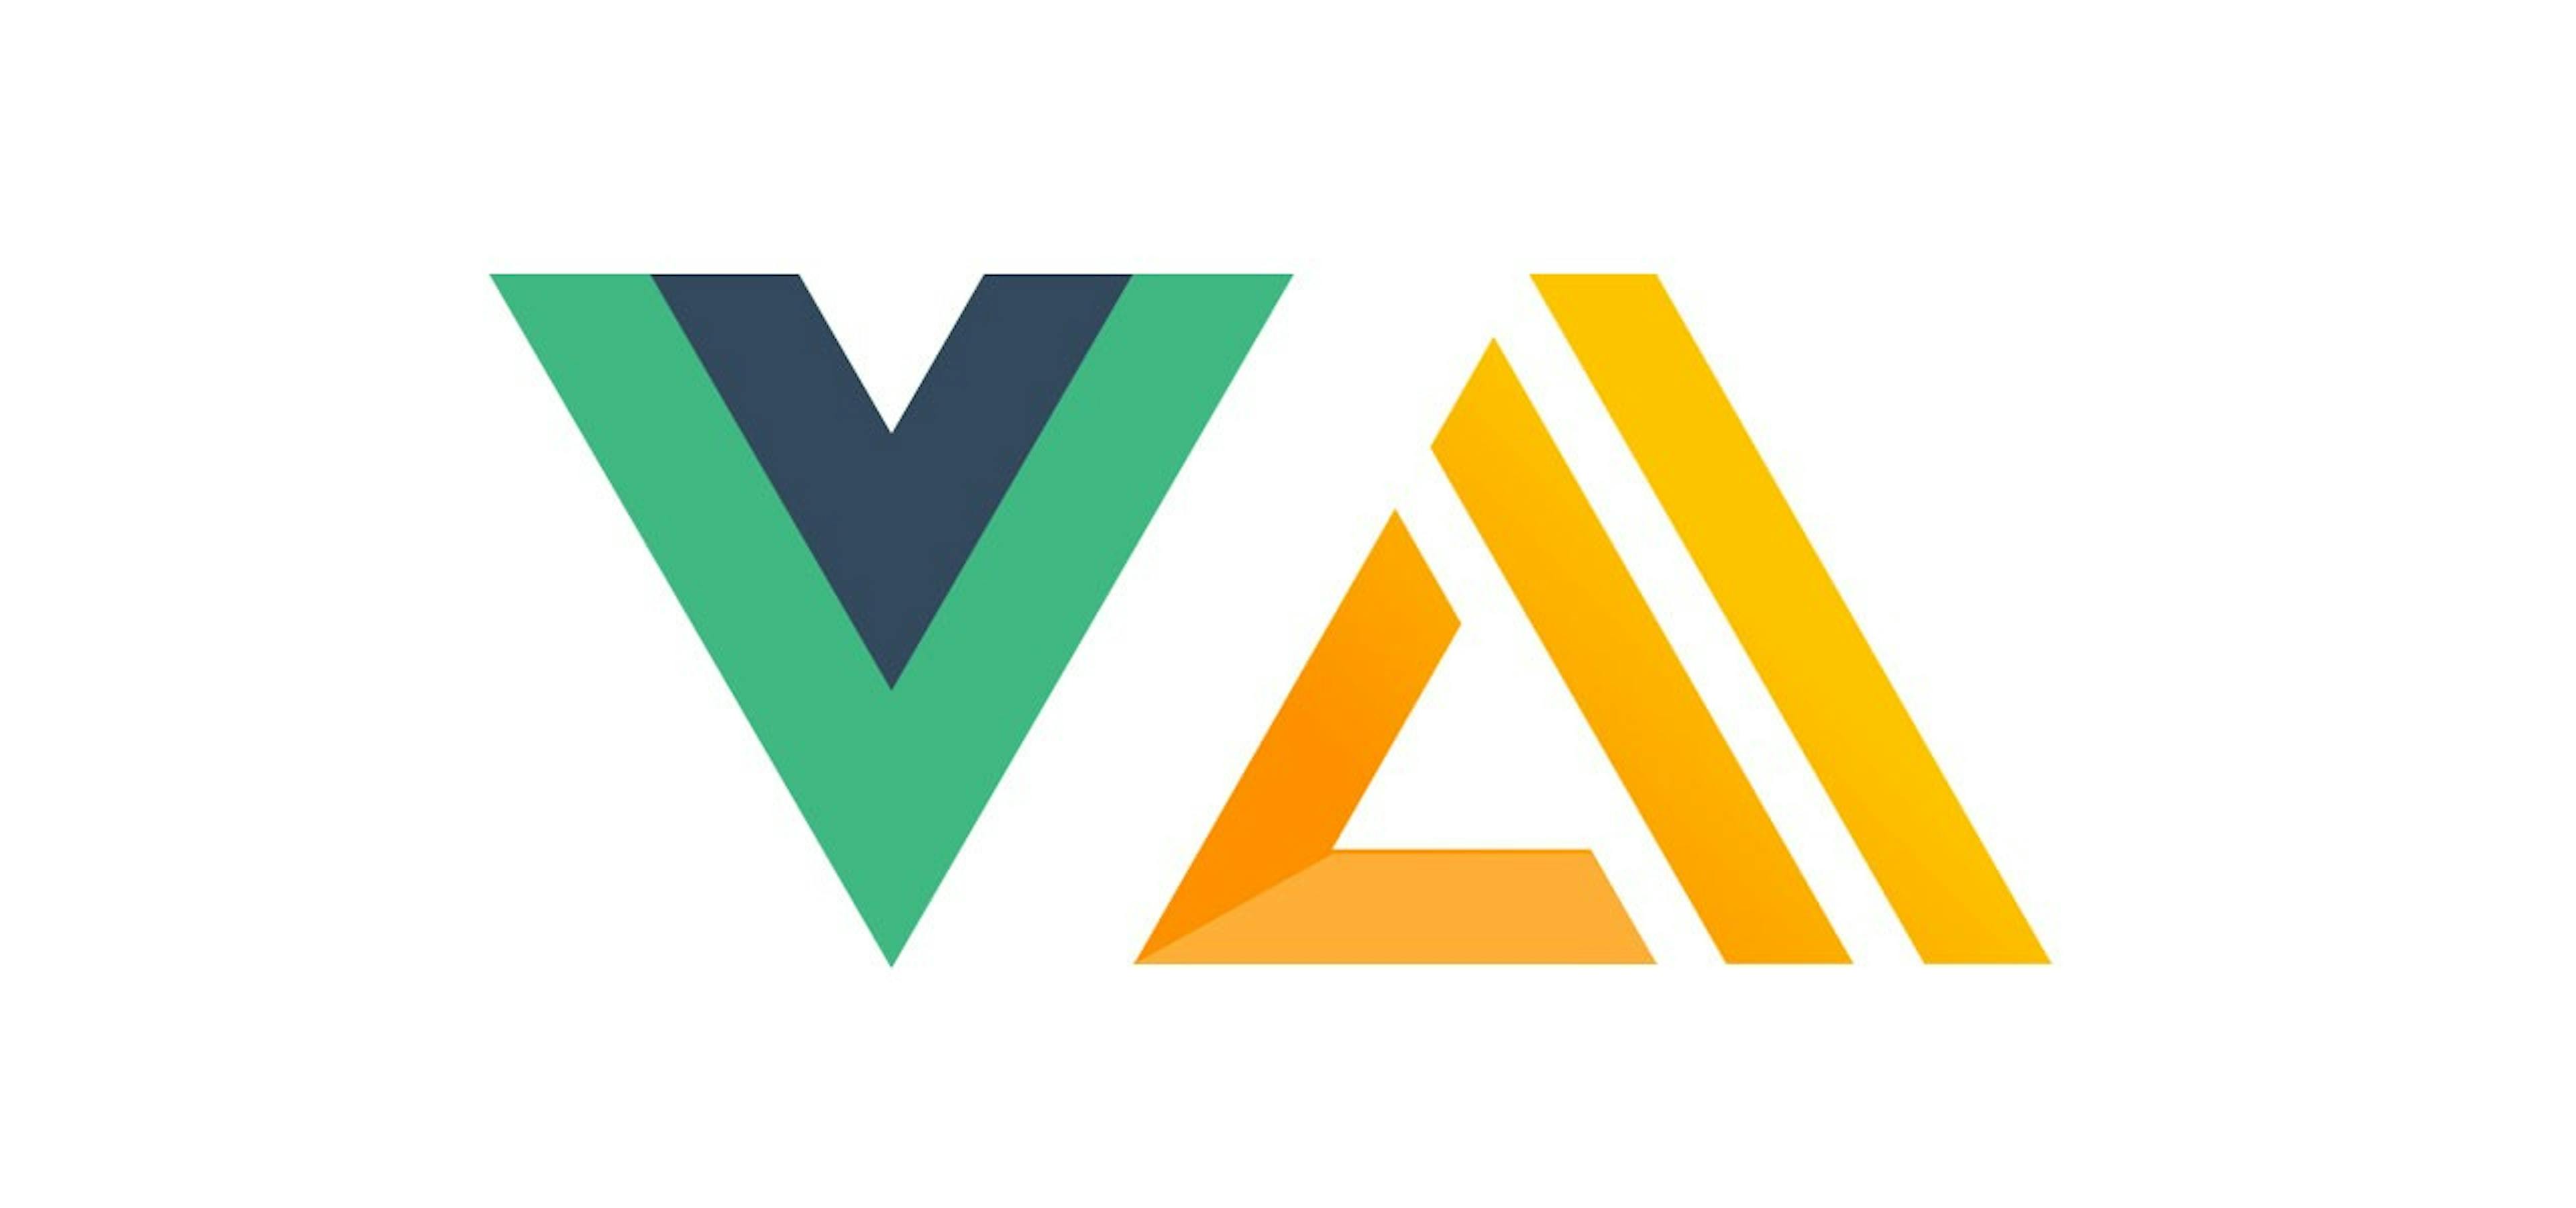 /how-to-build-serverless-vue-applications-with-aws-amplify-67d16c79e9d6 feature image